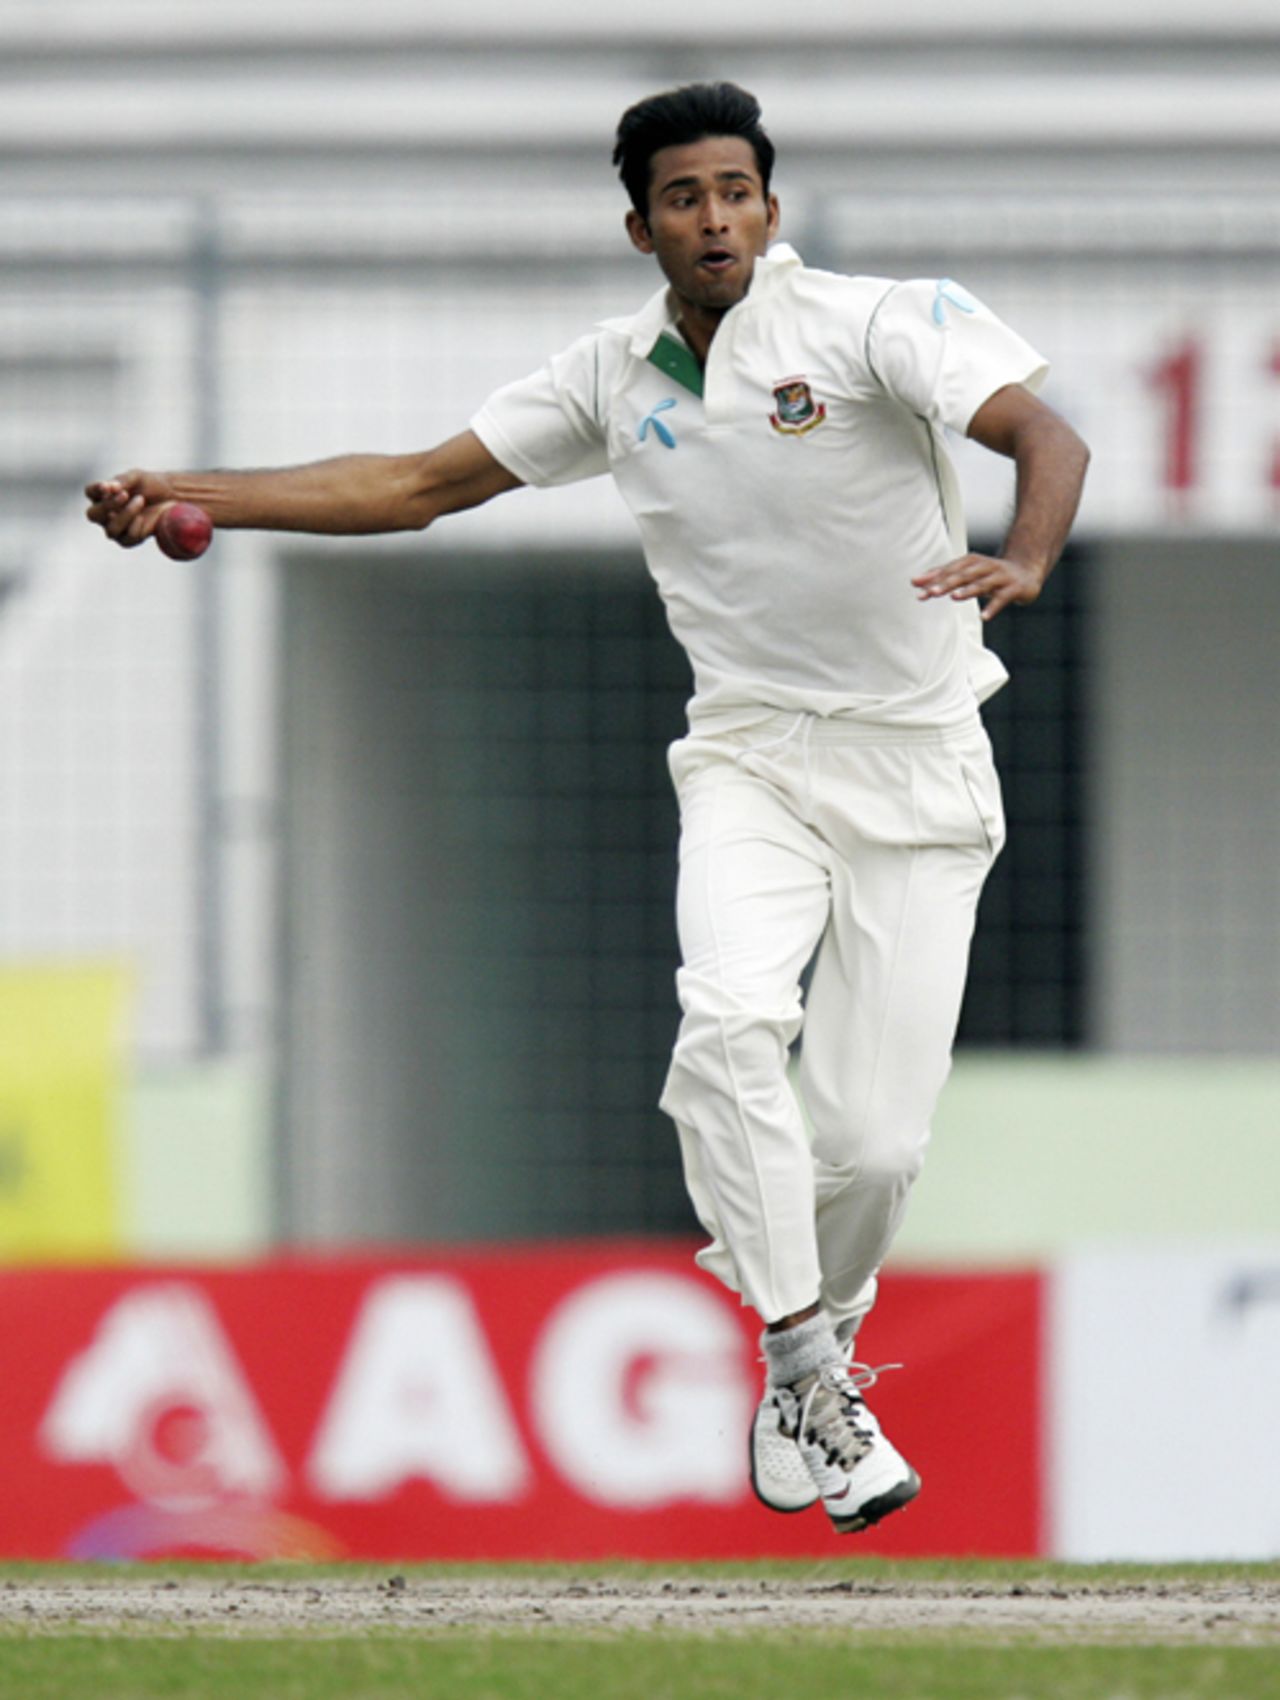 Shahadat Hossain fields off his own bowling, Bangladesh v South Africa, 1st Test, Mirpur, 4th day, February 25, 2008 